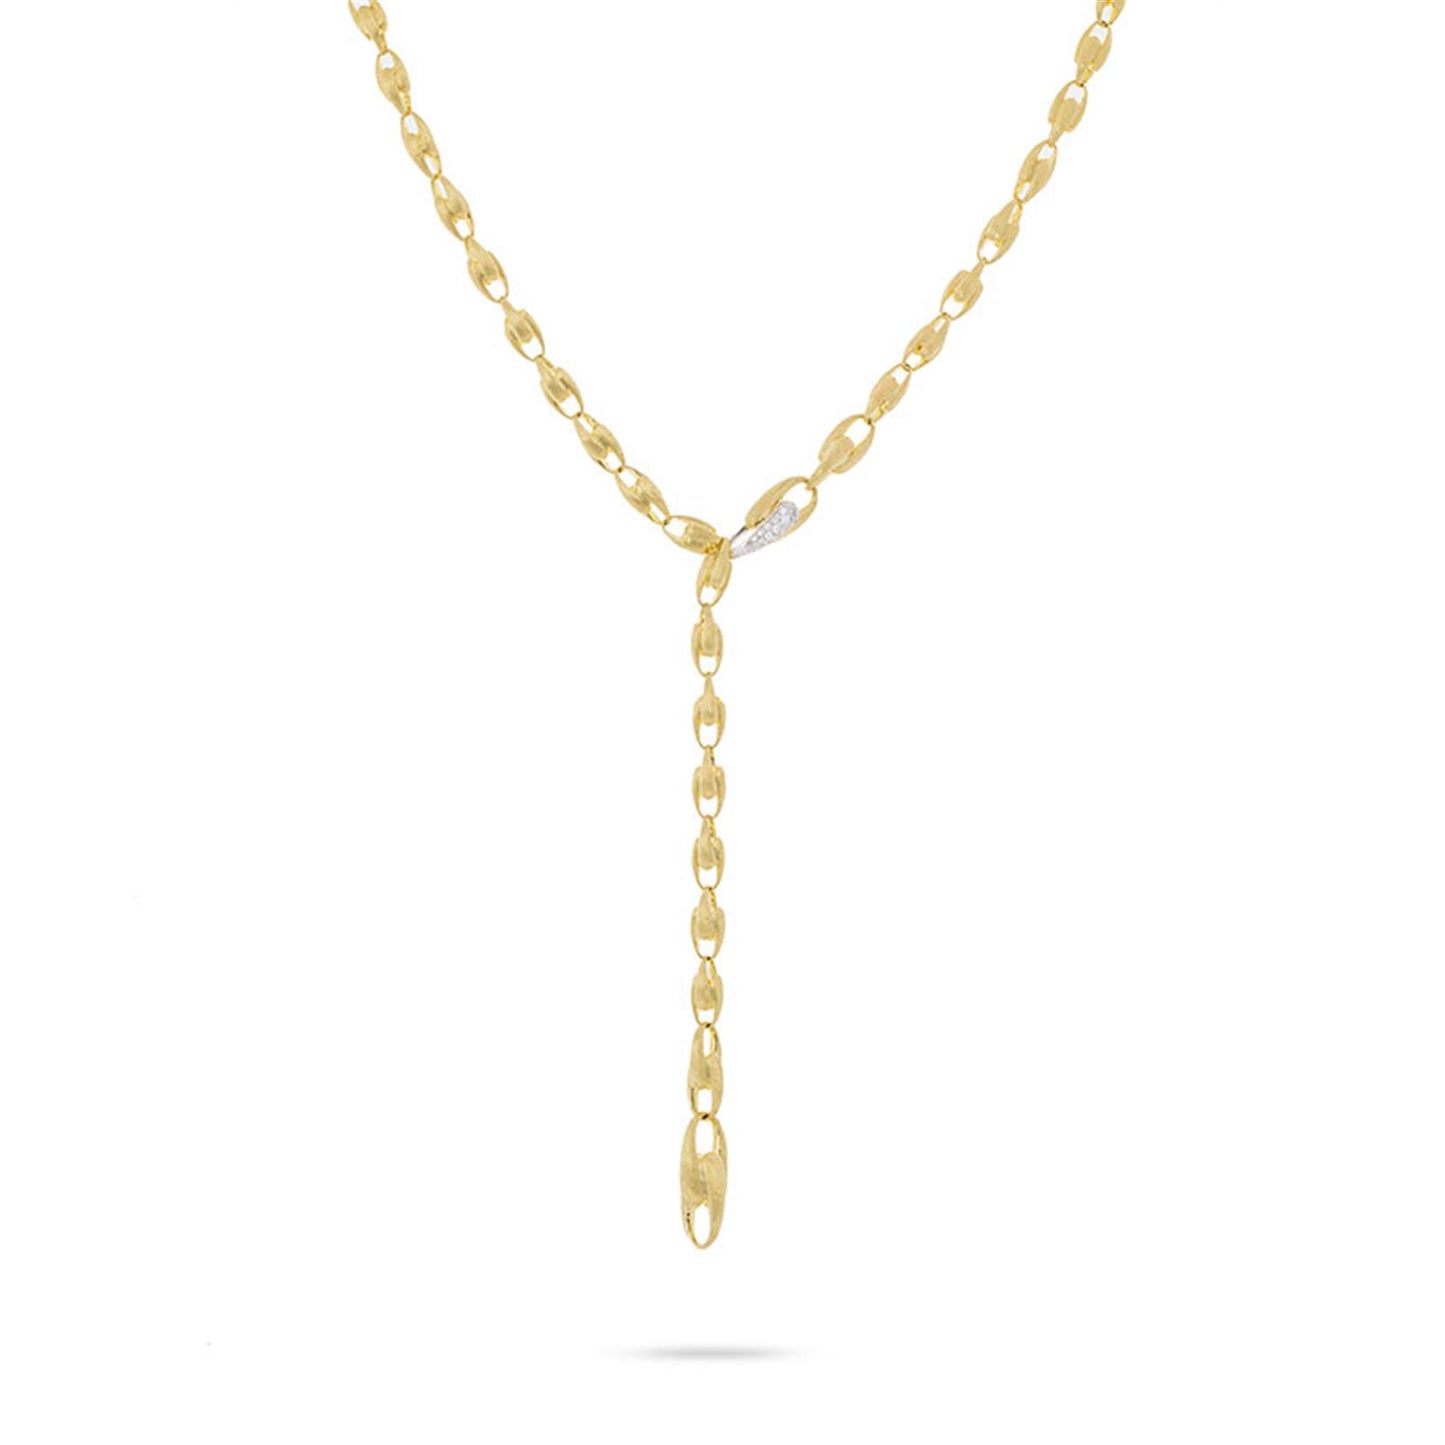 Marco Bicego Lucia Link Lariat Necklace with Diamonds